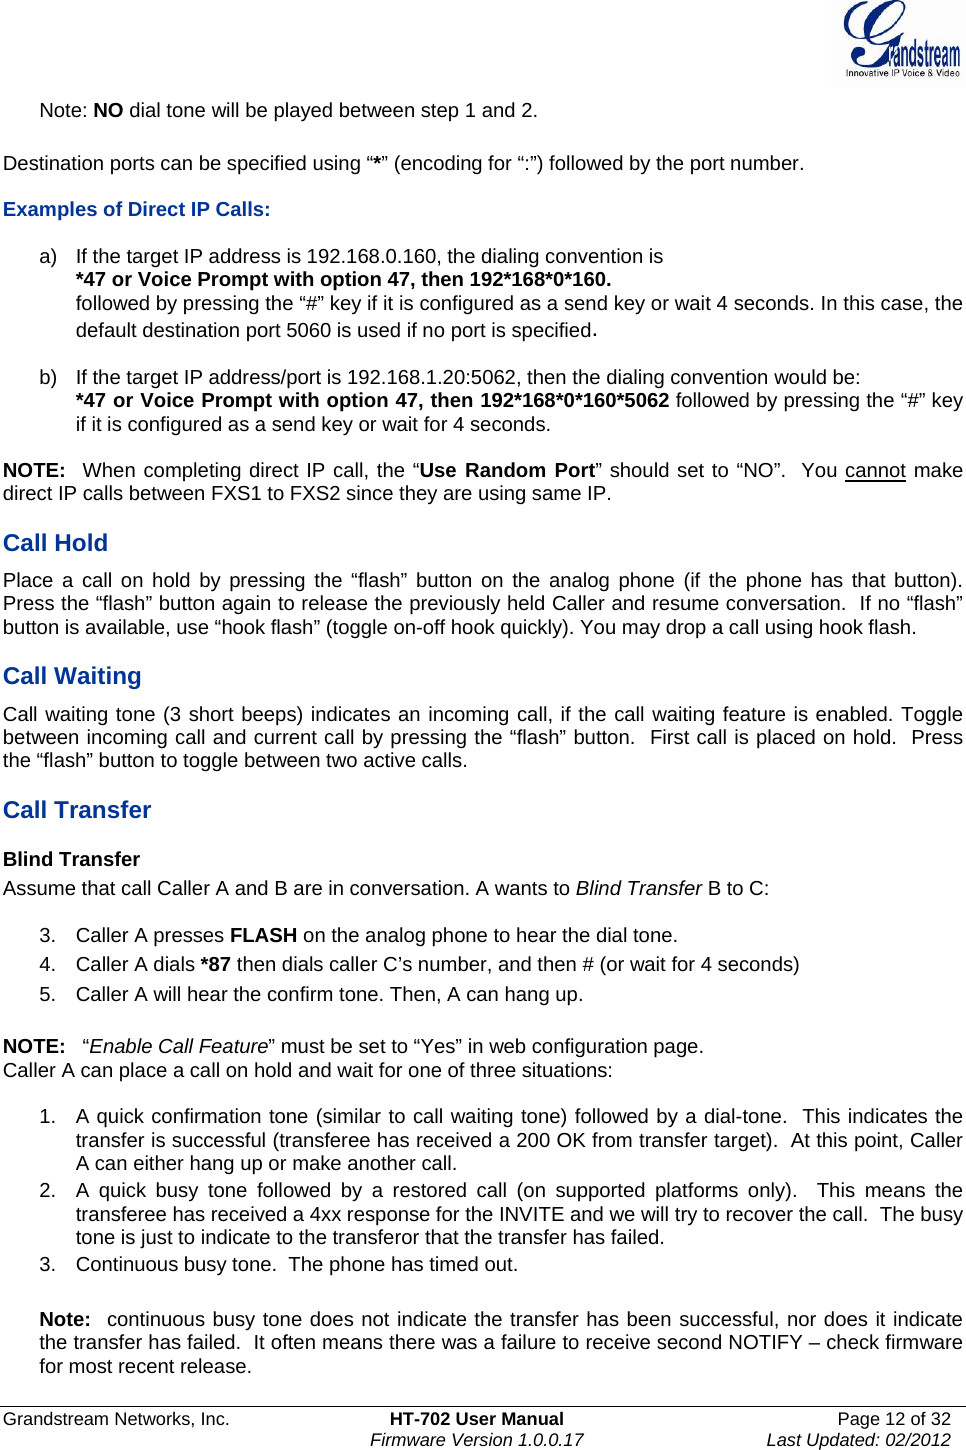  Grandstream Networks, Inc.  HT-702 User Manual  Page 12 of 32    Firmware Version 1.0.0.17  Last Updated: 02/2012  Note: NO dial tone will be played between step 1 and 2.  Destination ports can be specified using “*” (encoding for “:”) followed by the port number.    Examples of Direct IP Calls:   a)  If the target IP address is 192.168.0.160, the dialing convention is *47 or Voice Prompt with option 47, then 192*168*0*160.  followed by pressing the “#” key if it is configured as a send key or wait 4 seconds. In this case, the default destination port 5060 is used if no port is specified.   b)  If the target IP address/port is 192.168.1.20:5062, then the dialing convention would be: *47 or Voice Prompt with option 47, then 192*168*0*160*5062 followed by pressing the “#” key if it is configured as a send key or wait for 4 seconds.  NOTE:  When completing direct IP call, the “Use Random Port” should set to “NO”.  You cannot make direct IP calls between FXS1 to FXS2 since they are using same IP.  Call Hold Place a call on hold by pressing the “flash” button on the analog phone (if the phone has that button). Press the “flash” button again to release the previously held Caller and resume conversation.  If no “flash” button is available, use “hook flash” (toggle on-off hook quickly). You may drop a call using hook flash.    Call Waiting Call waiting tone (3 short beeps) indicates an incoming call, if the call waiting feature is enabled. Toggle between incoming call and current call by pressing the “flash” button.  First call is placed on hold.  Press the “flash” button to toggle between two active calls.   Call Transfer Blind Transfer Assume that call Caller A and B are in conversation. A wants to Blind Transfer B to C:  3. Caller A presses FLASH on the analog phone to hear the dial tone. 4. Caller A dials *87 then dials caller C’s number, and then # (or wait for 4 seconds) 5.  Caller A will hear the confirm tone. Then, A can hang up.  NOTE:   “Enable Call Feature” must be set to “Yes” in web configuration page. Caller A can place a call on hold and wait for one of three situations:    1.  A quick confirmation tone (similar to call waiting tone) followed by a dial-tone.  This indicates the transfer is successful (transferee has received a 200 OK from transfer target).  At this point, Caller A can either hang up or make another call.  2.  A quick busy tone followed by a restored call (on supported platforms only).  This means the transferee has received a 4xx response for the INVITE and we will try to recover the call.  The busy tone is just to indicate to the transferor that the transfer has failed.  3.  Continuous busy tone.  The phone has timed out.    Note:  continuous busy tone does not indicate the transfer has been successful, nor does it indicate the transfer has failed.  It often means there was a failure to receive second NOTIFY – check firmware for most recent release.  